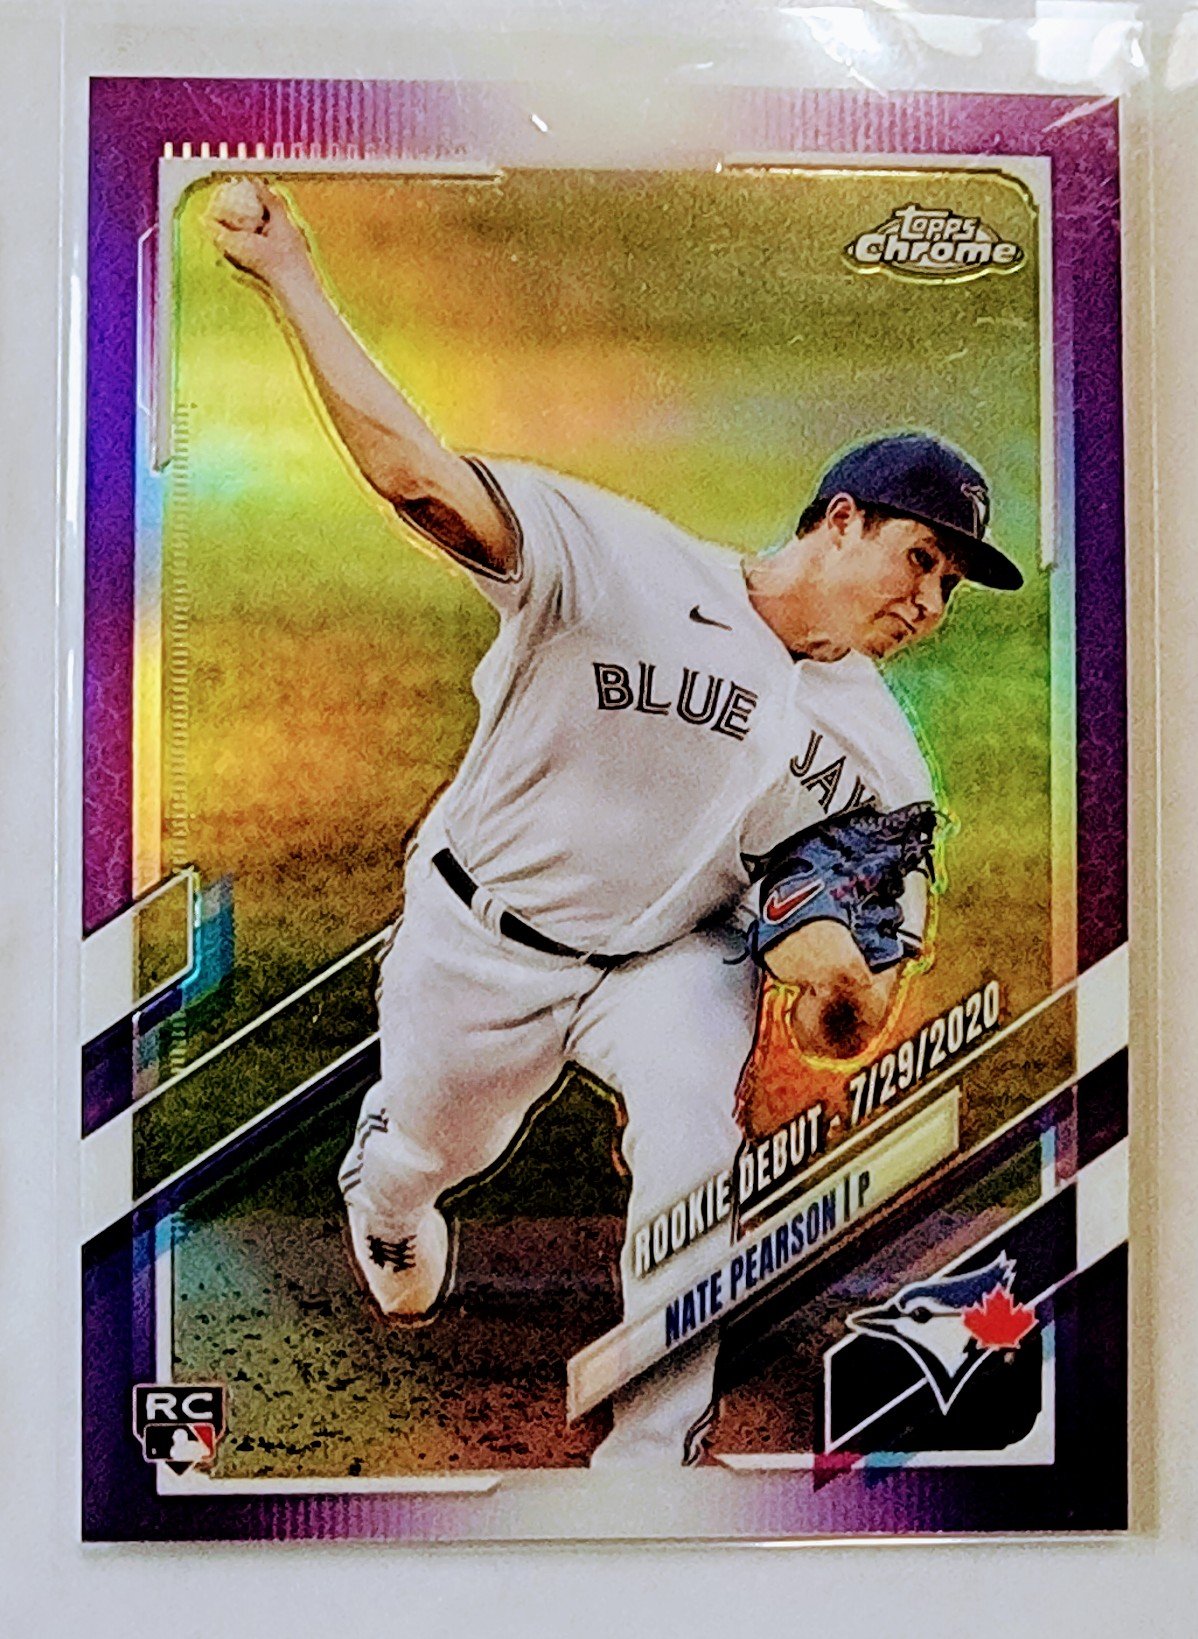 2021 Topps Chrome Update Nate Pearson Rookie Debut Purple Refractor Ro